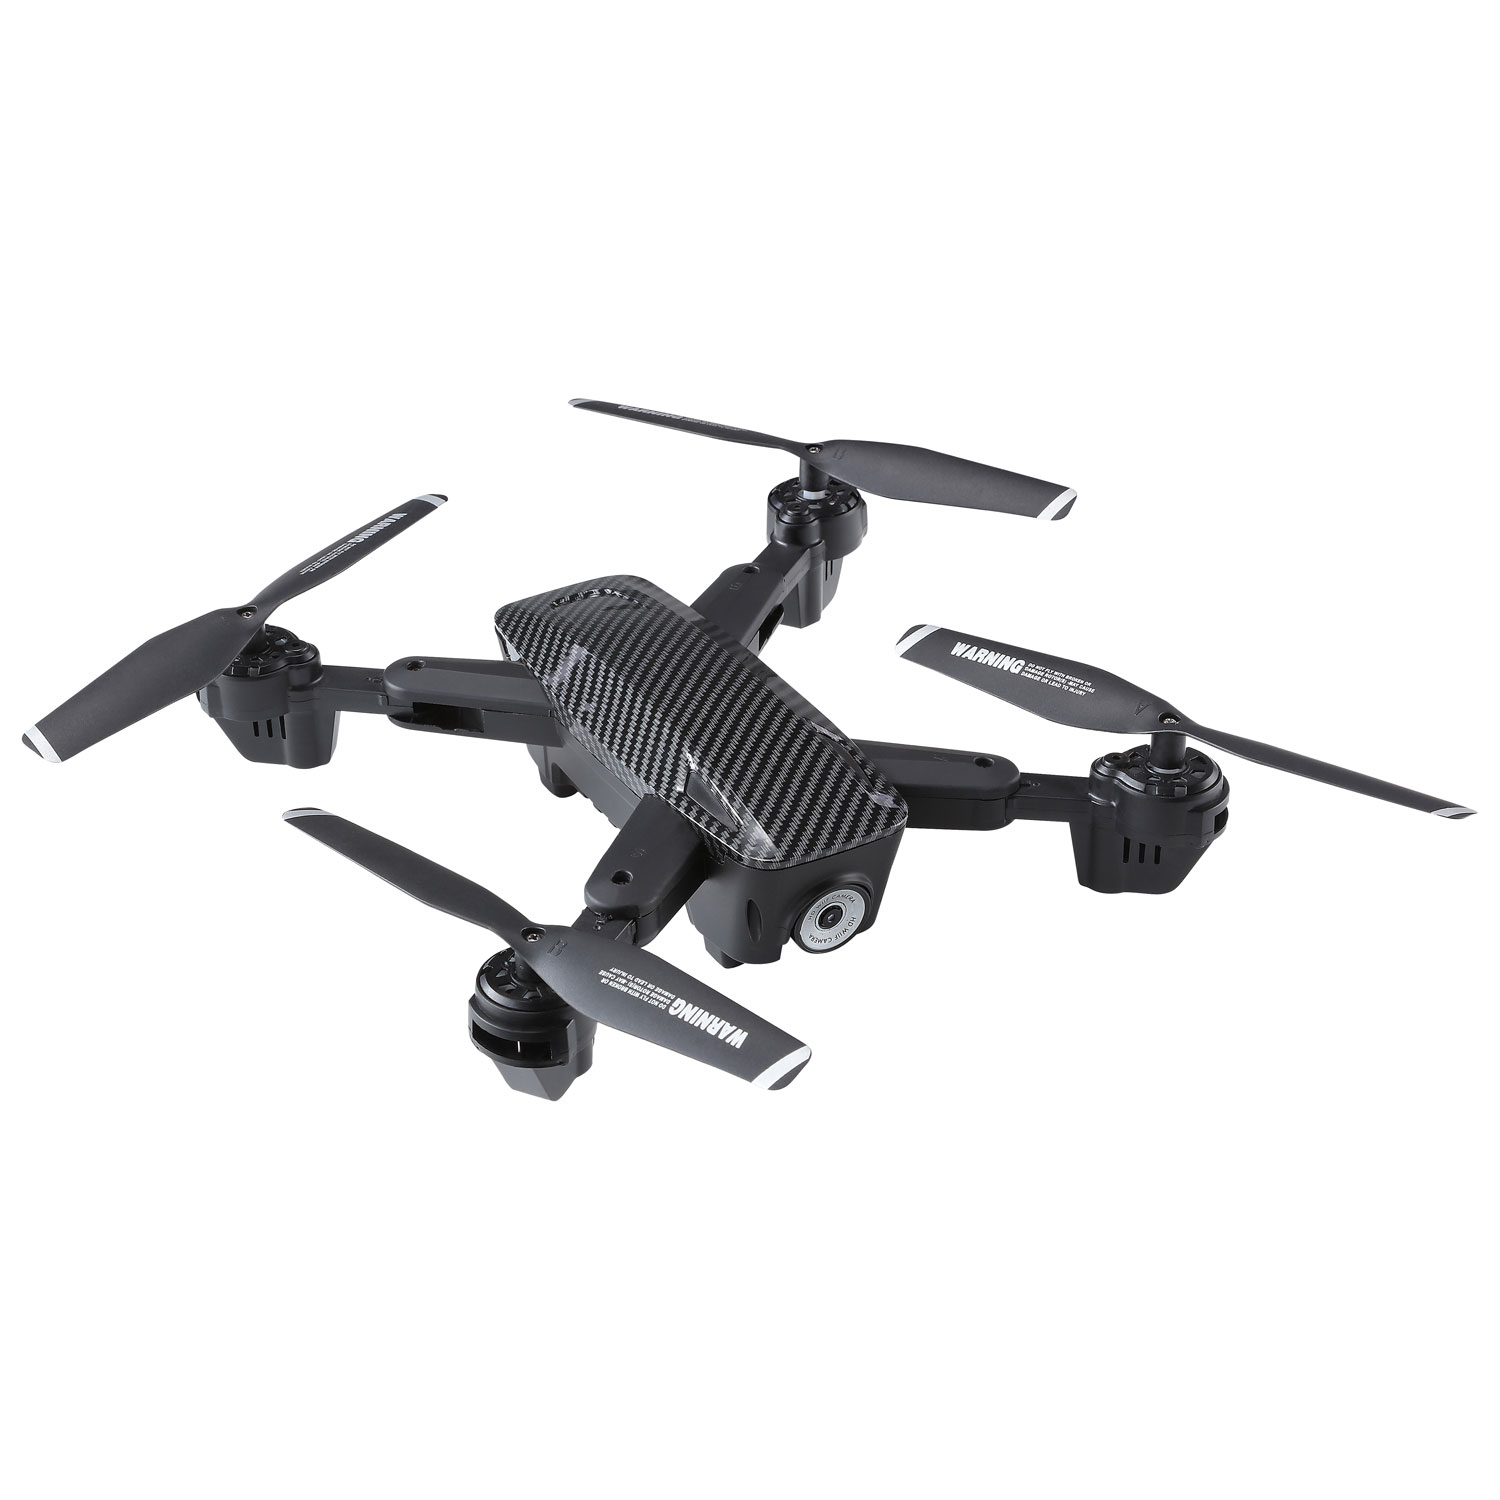 Vivitar Skyhawk Foldable RC Plane / Toy Drone with Camera & Controller - Black - Only at Best Buy